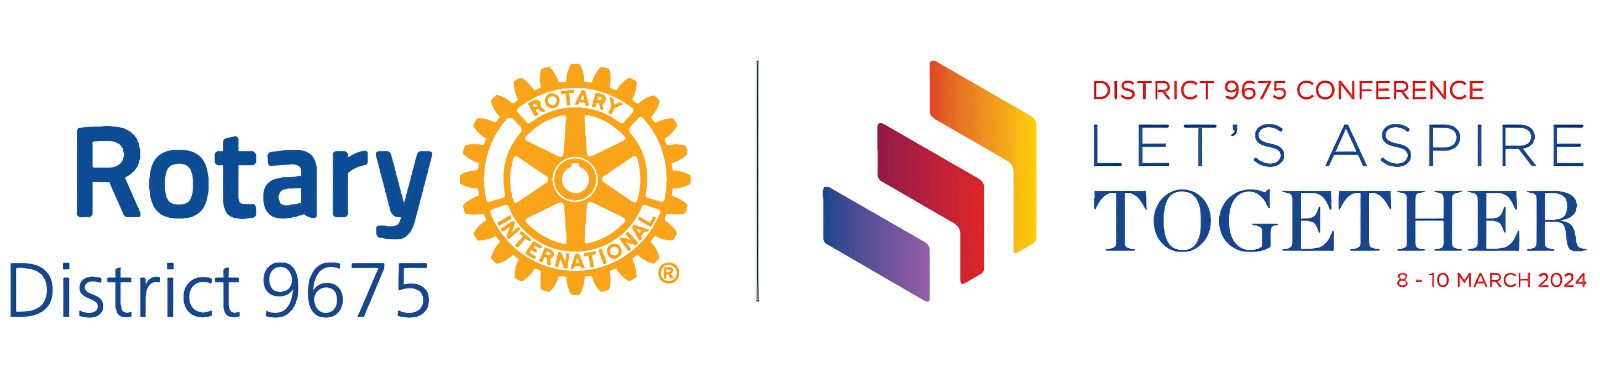 Rotary-Conference_2-Logos_v1_1600.png